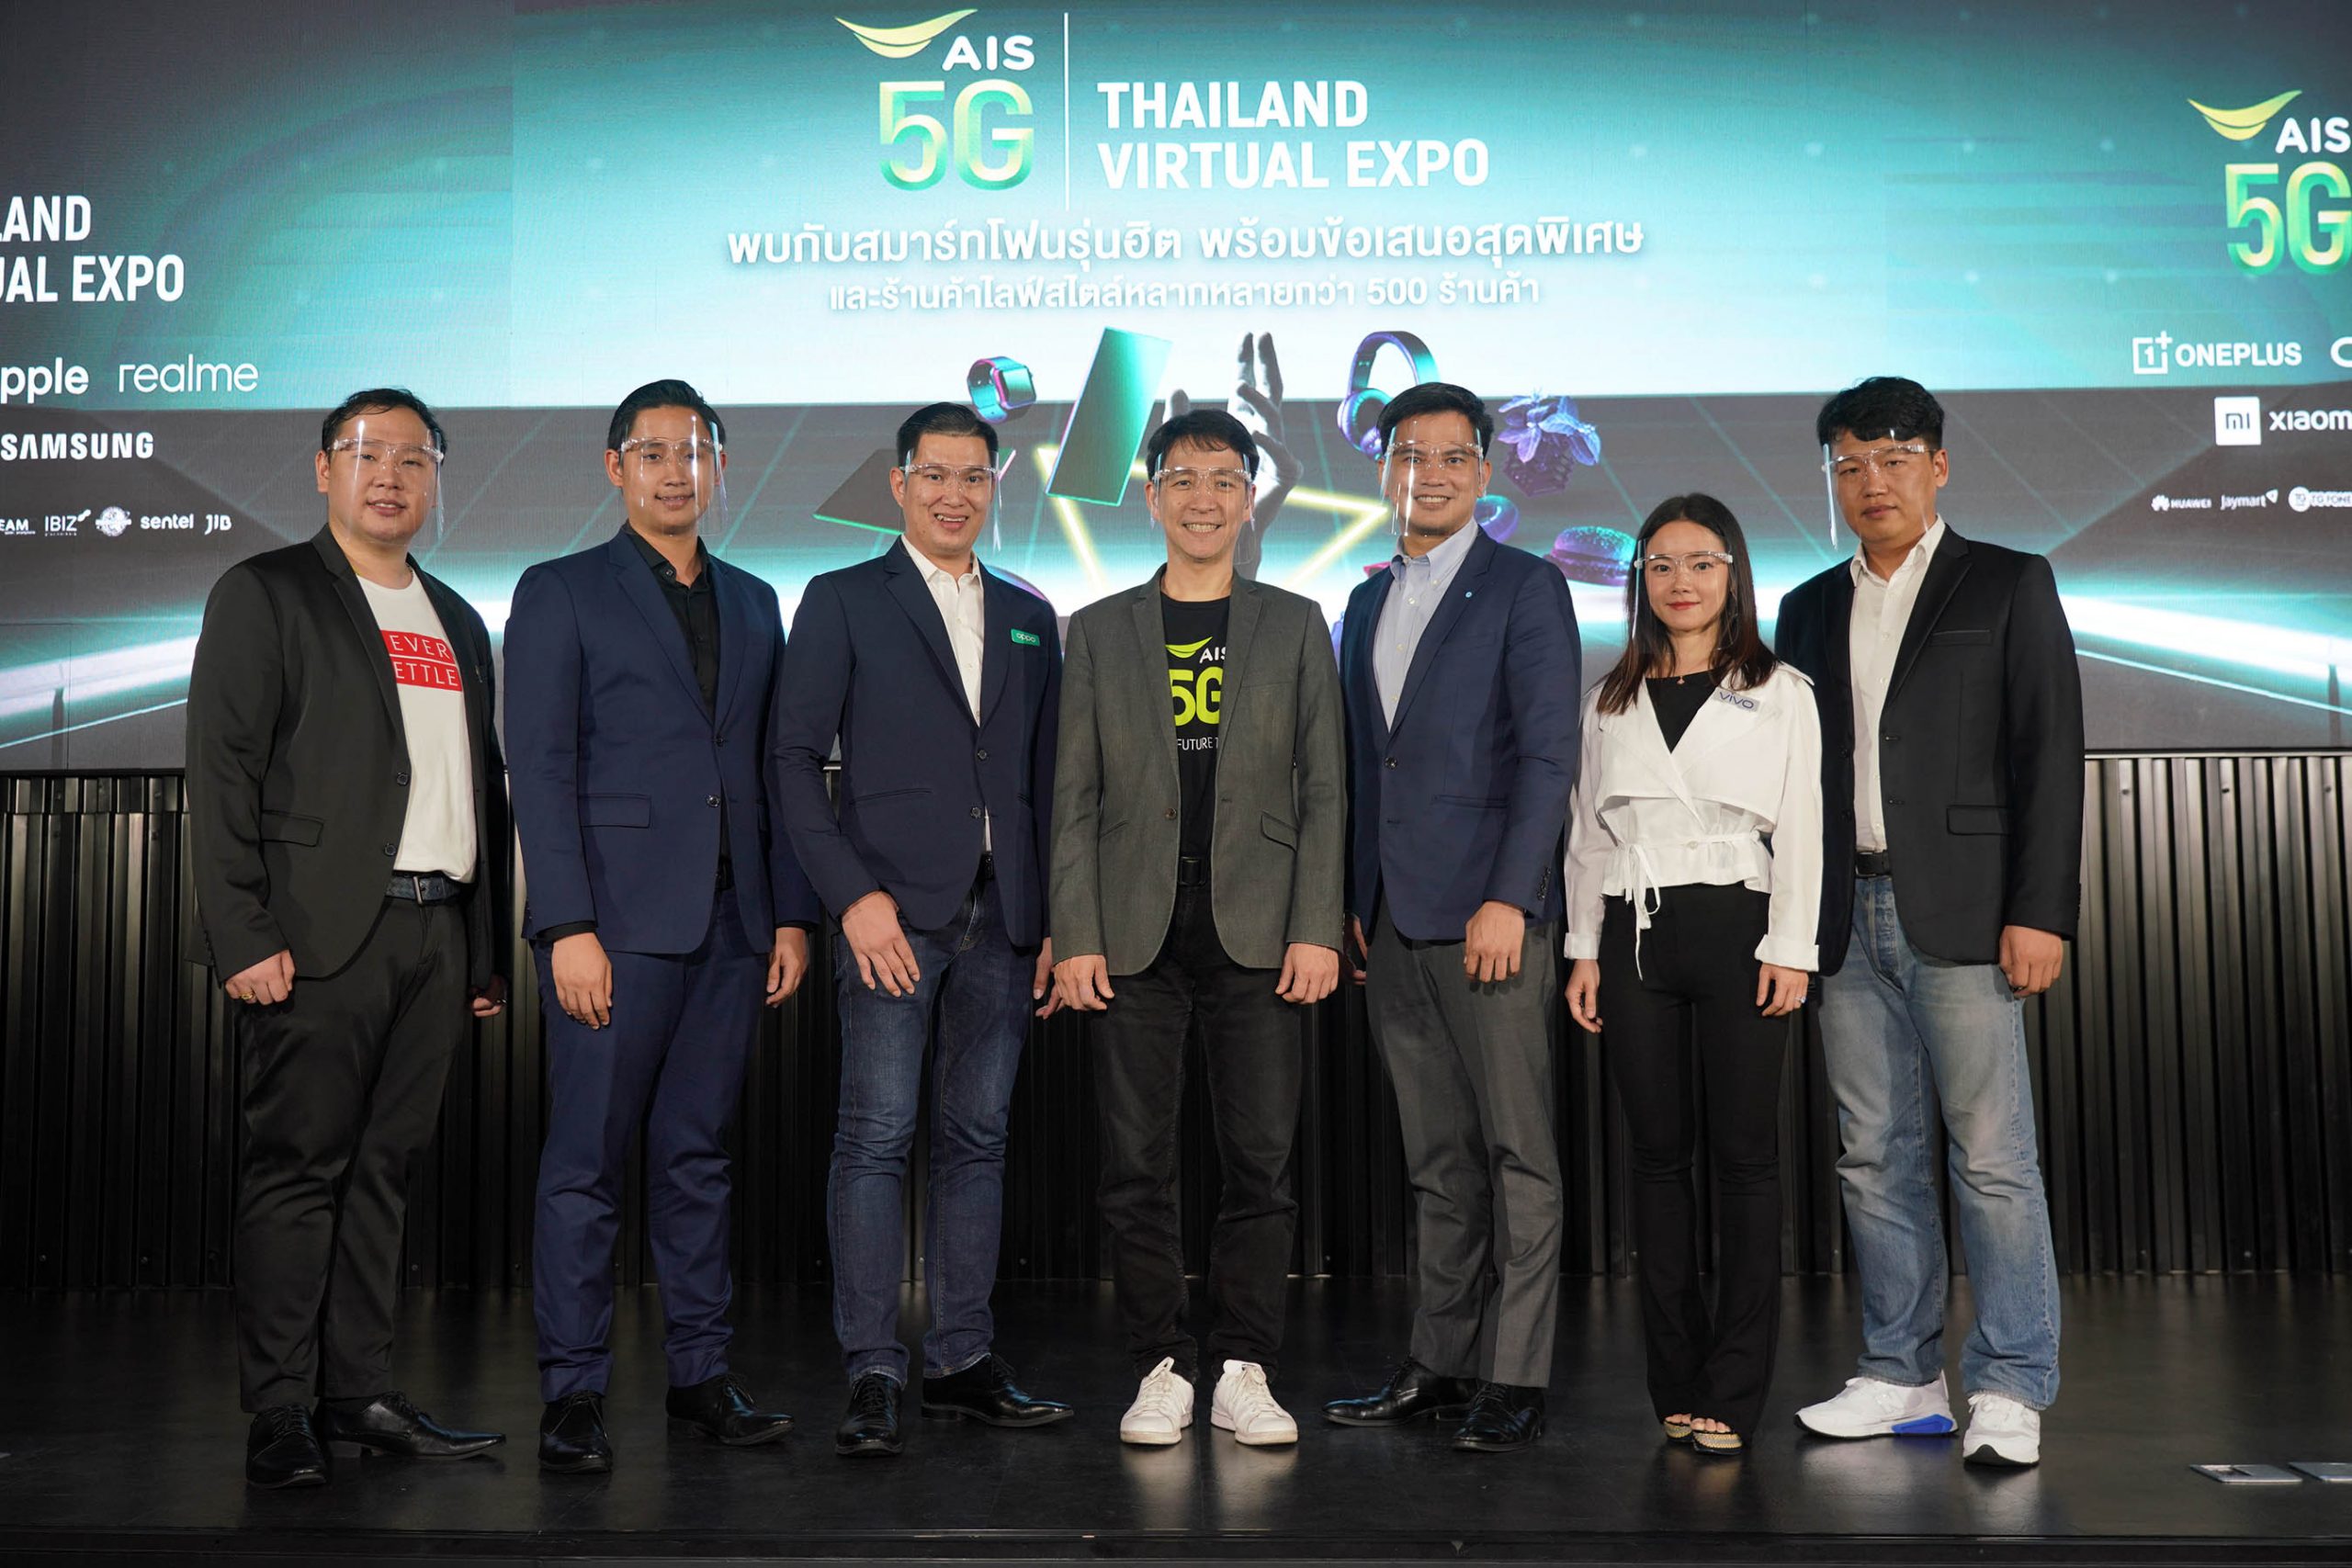 AIS 5G Thailand Virtual Expo, the first phenomenon in Thailand! The expo of IT, Food and Lifestyle, the biggest online virtual world